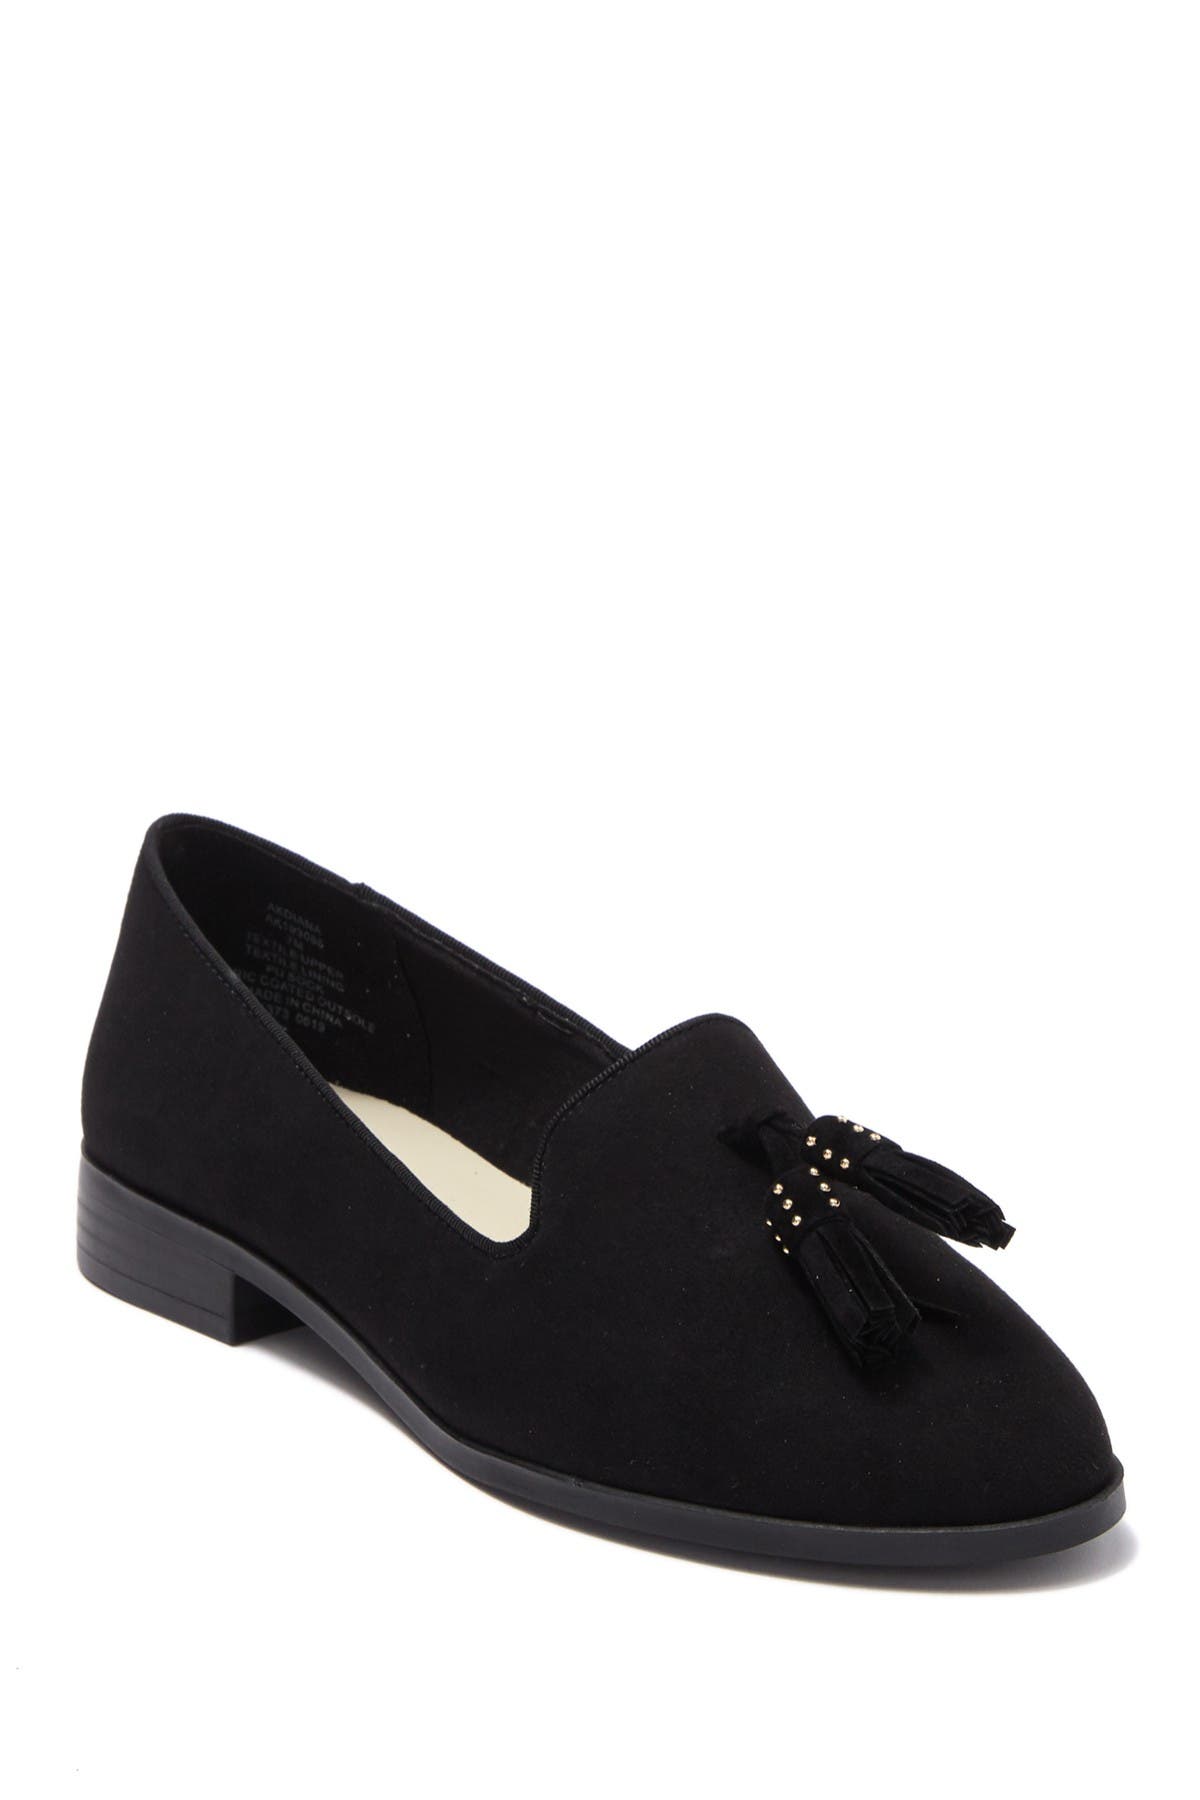 anne klein leather loafers